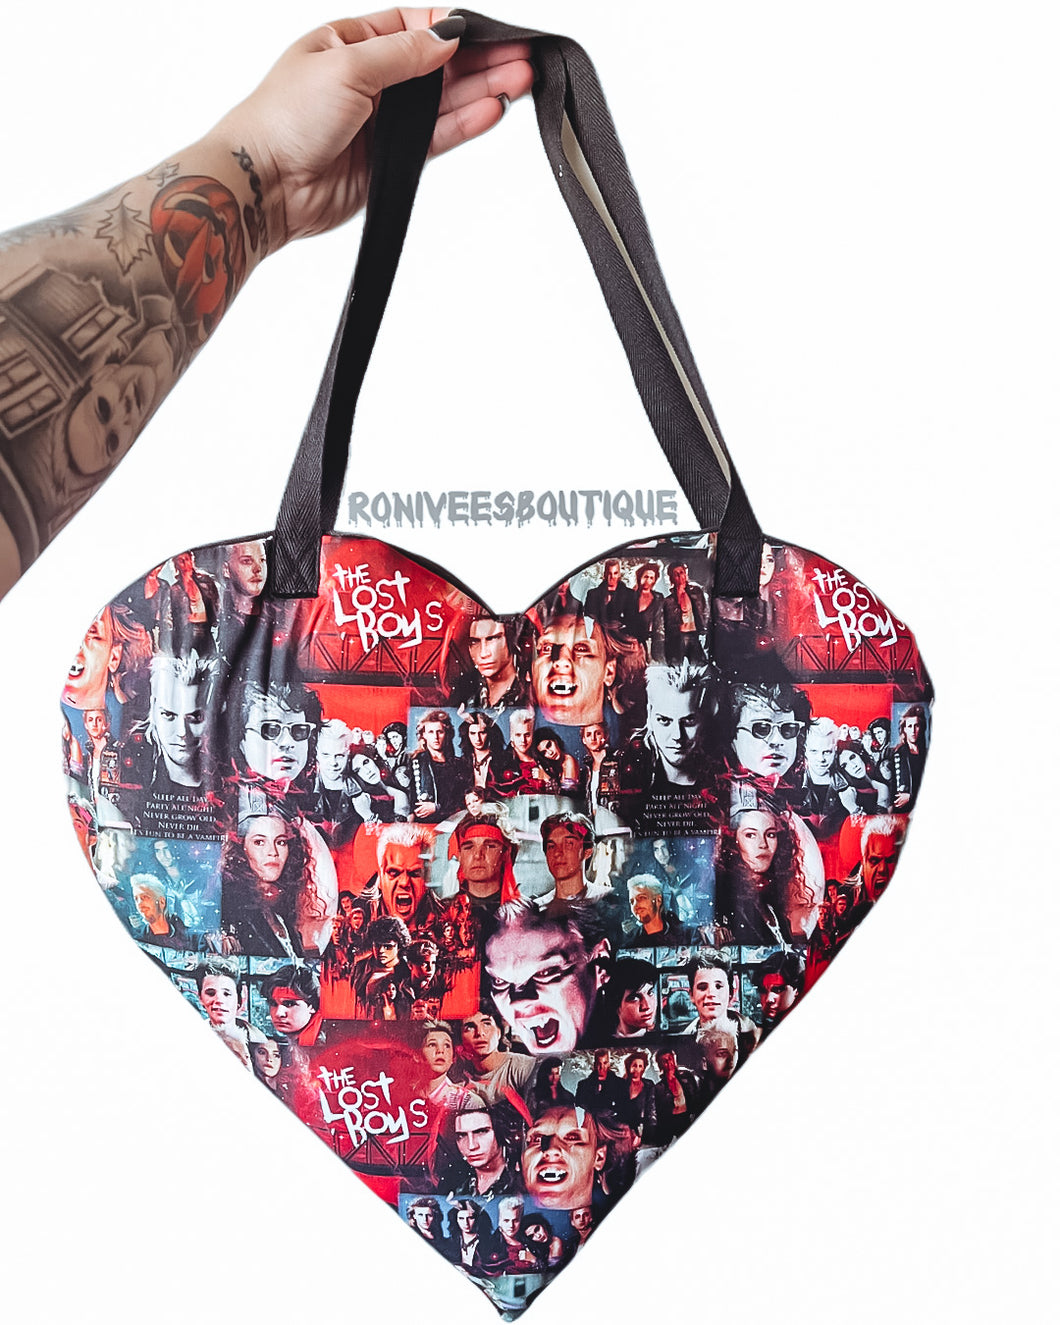 The Lost Boys Heart Tote Bag